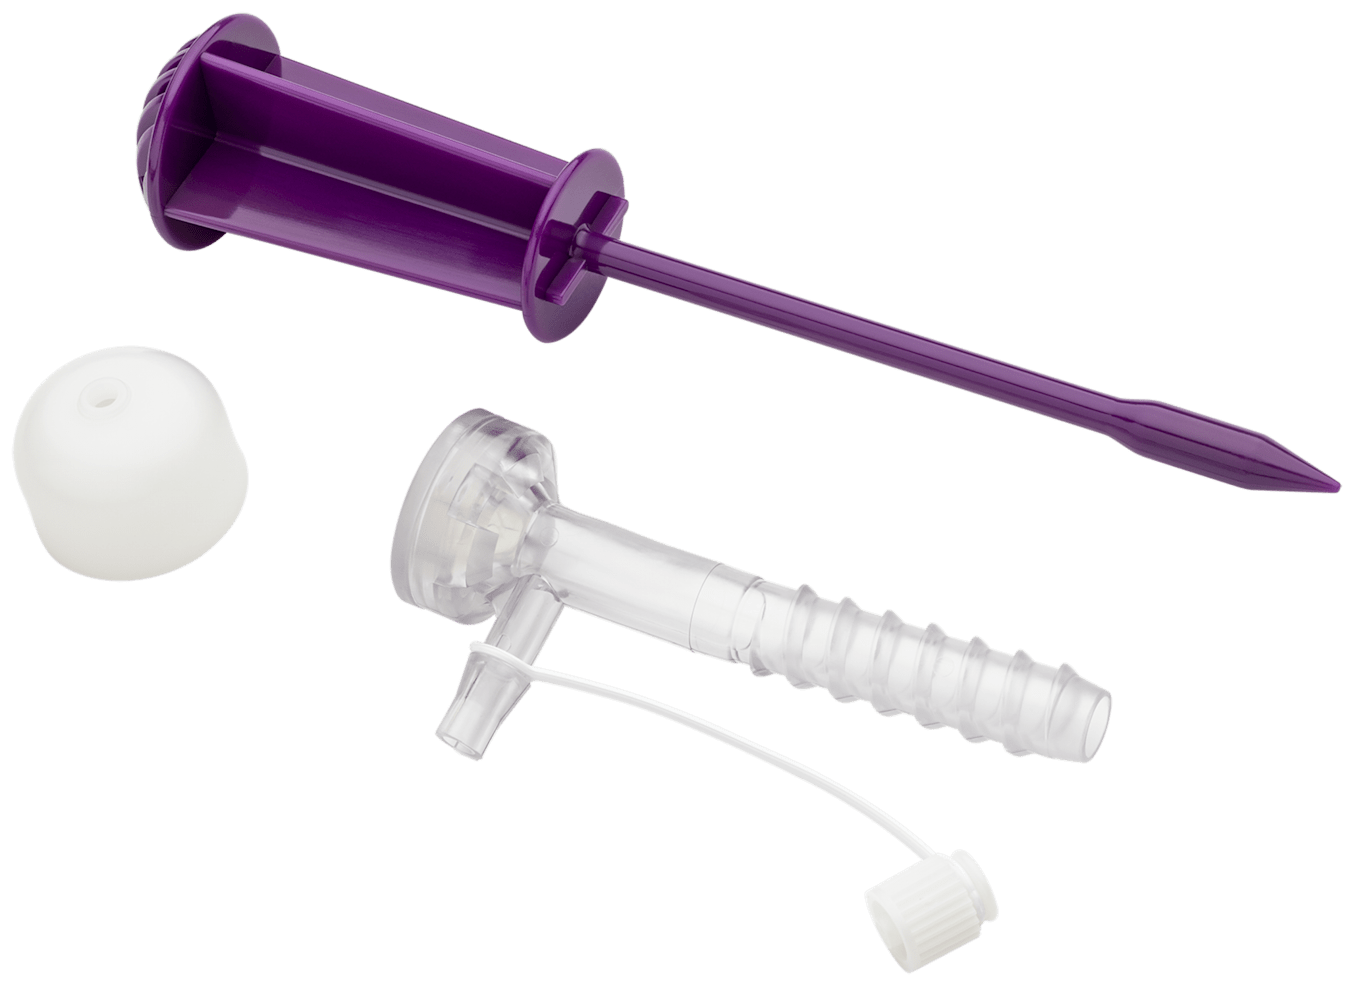 Twist-In Cannula with No-Squirt Cap, Flexible, 7.0 mm I.D. x 7.0 c m, VE5, steril, SU